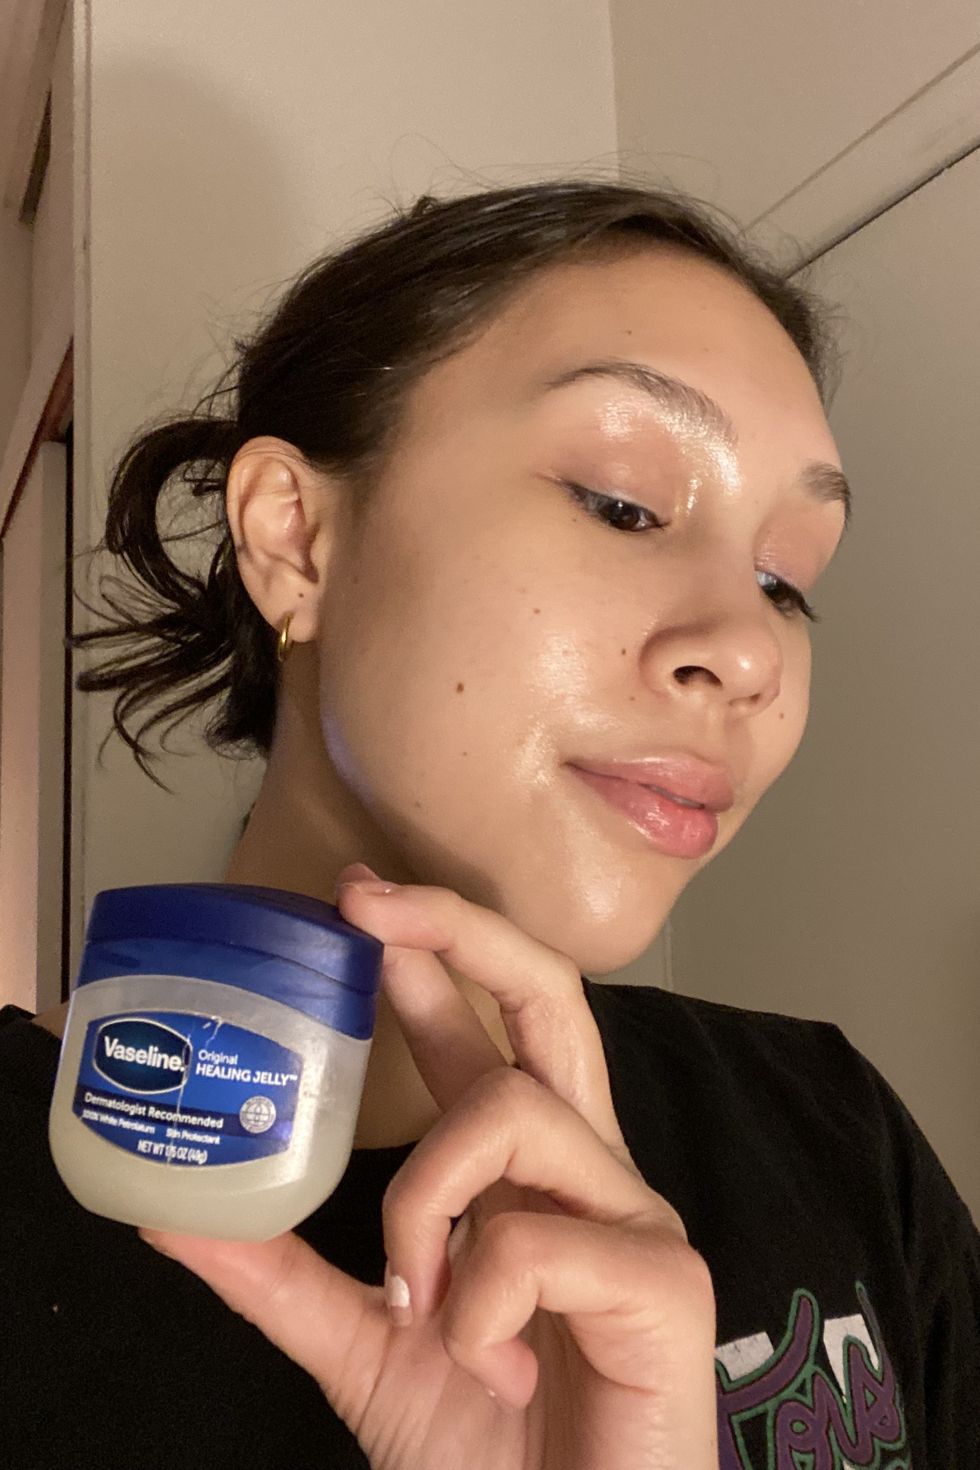 an image of jacqueline saguin, associate editor of products and reviews at good housekeeping holding a blue bottle of vaseline original healing jelly to slug her face